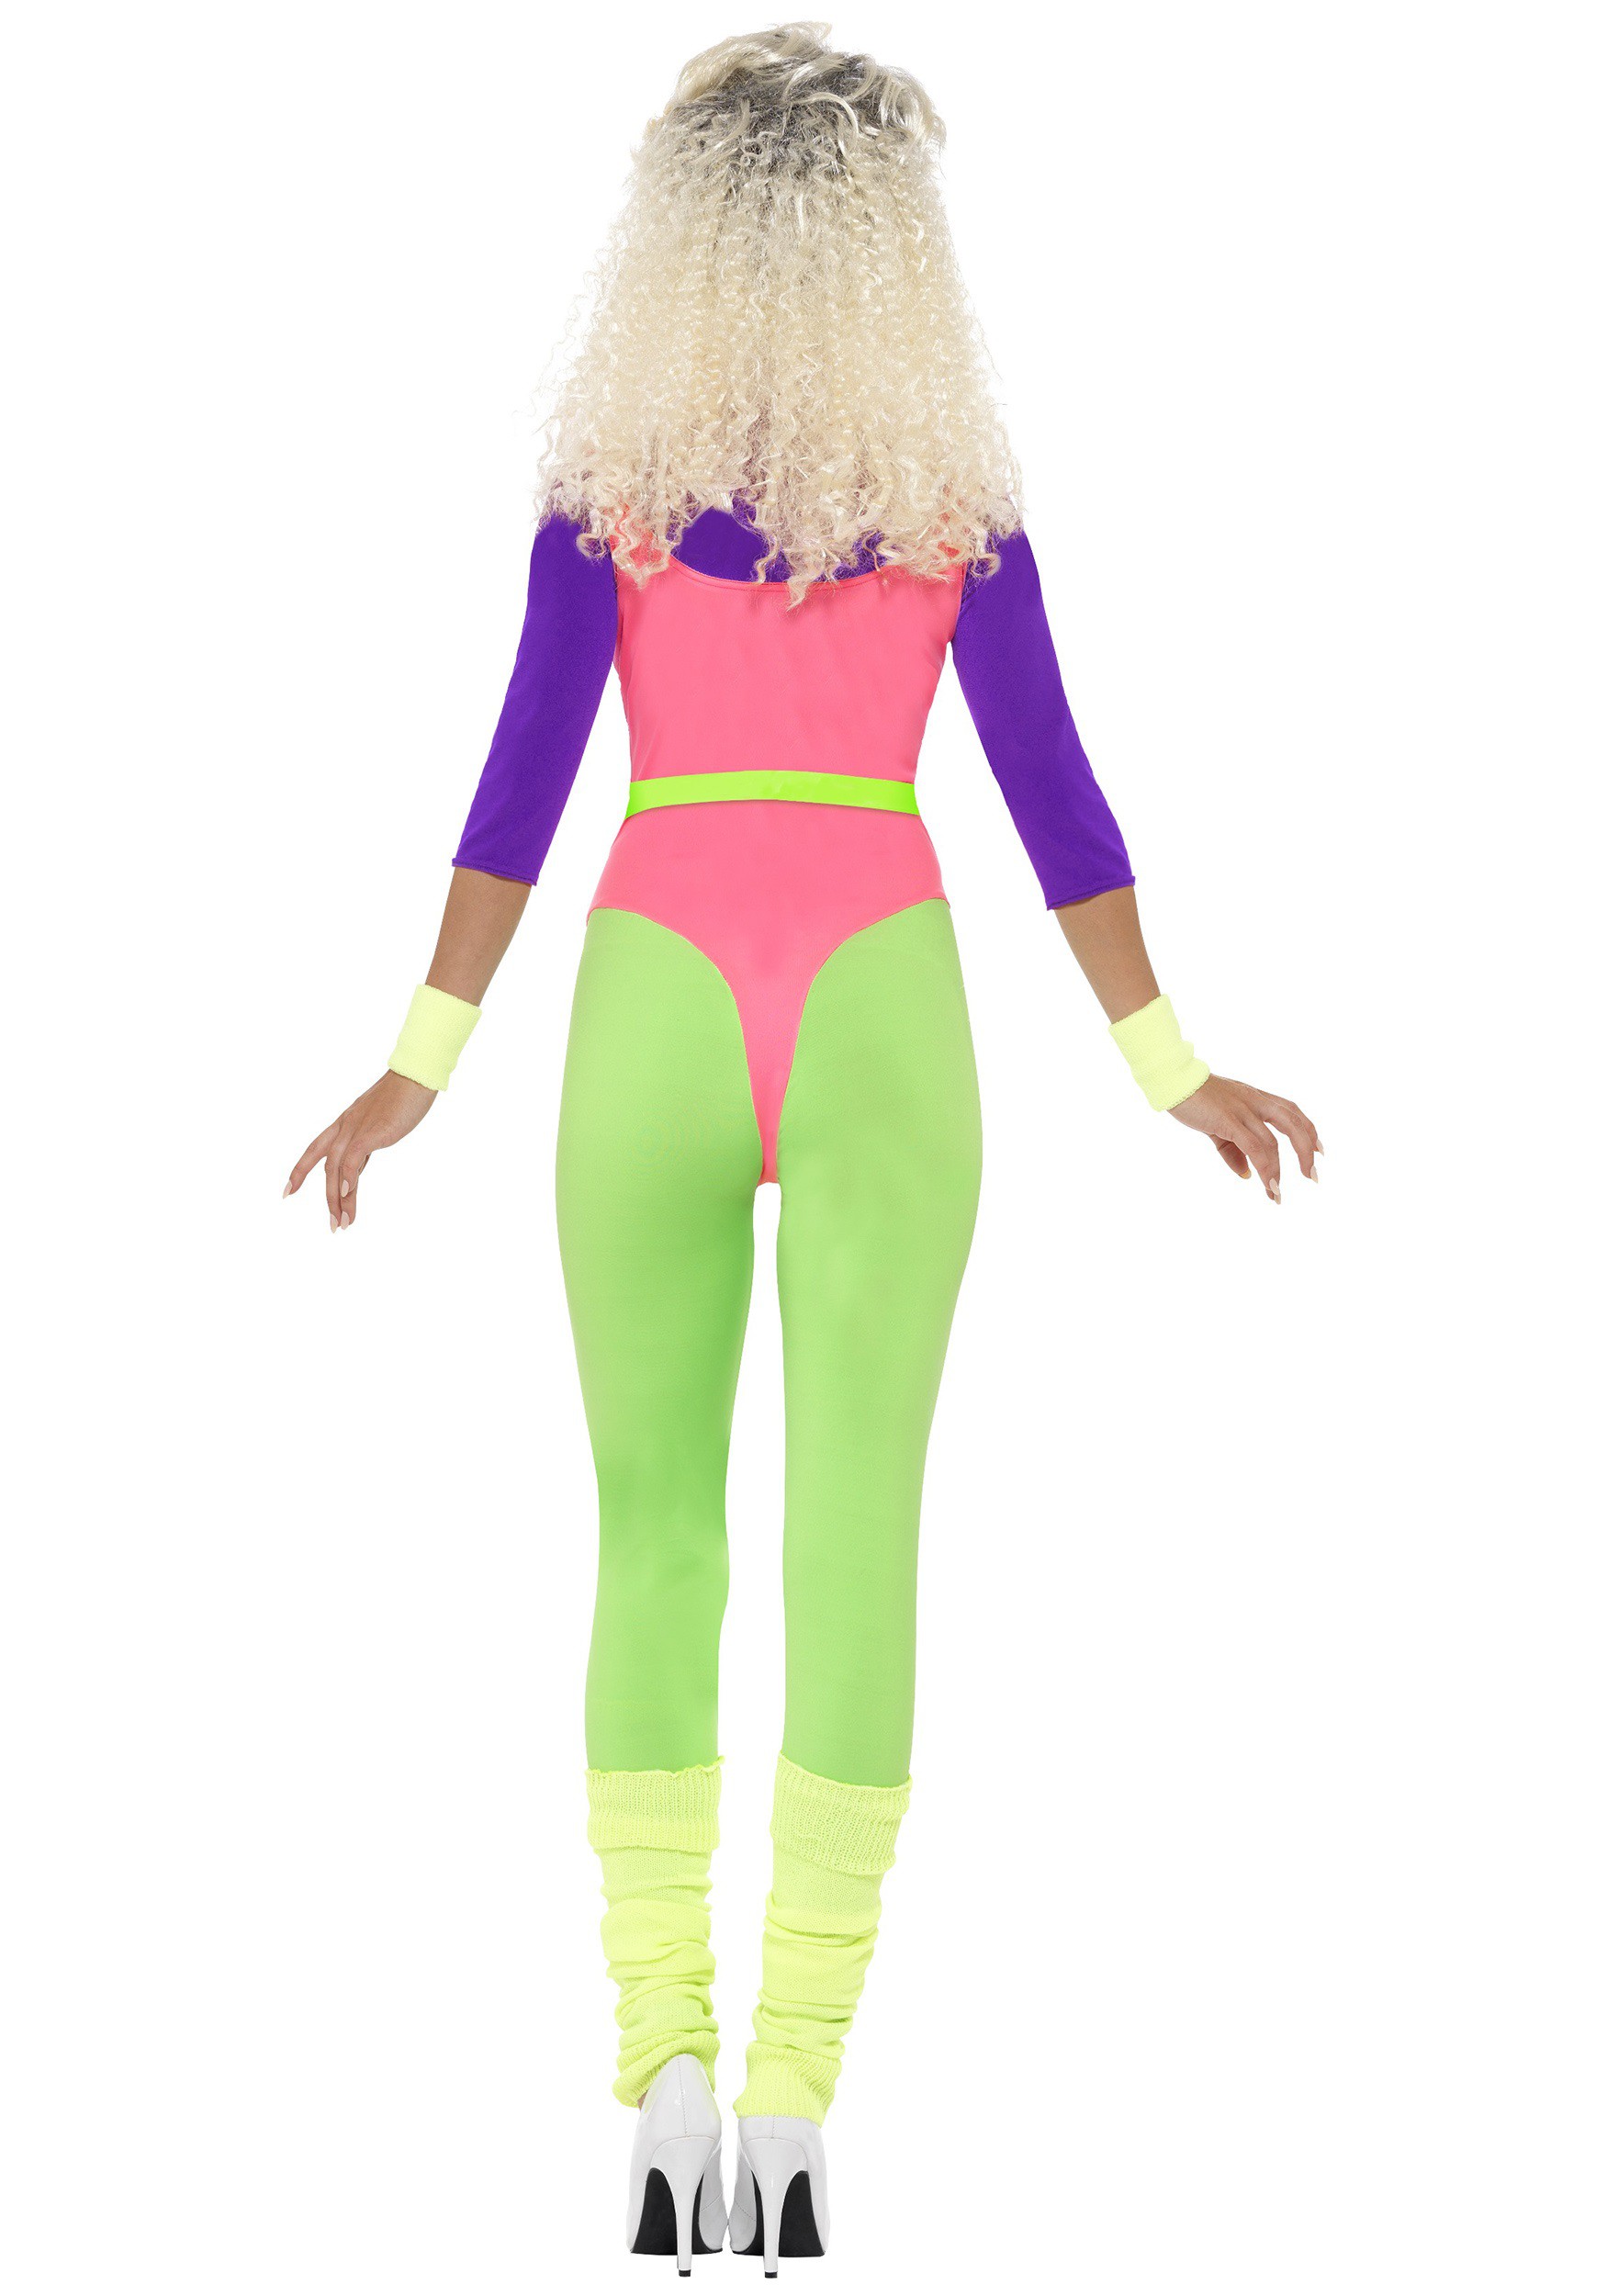 Neon 80s workout clothes